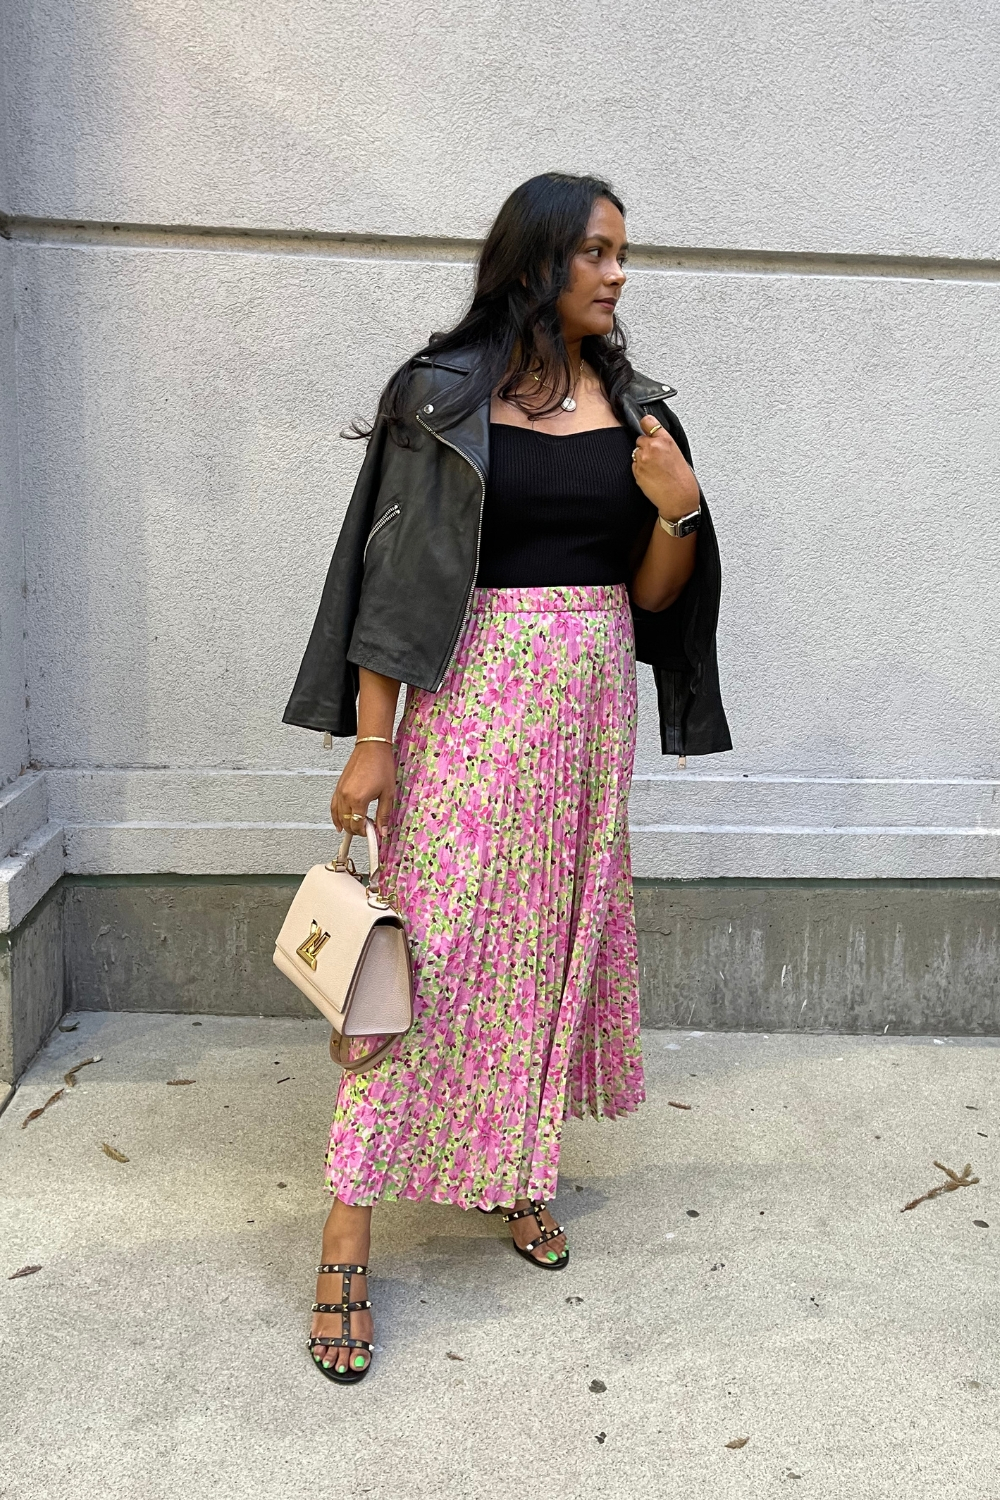 Printed pleated skirt with black leather jacket outfit